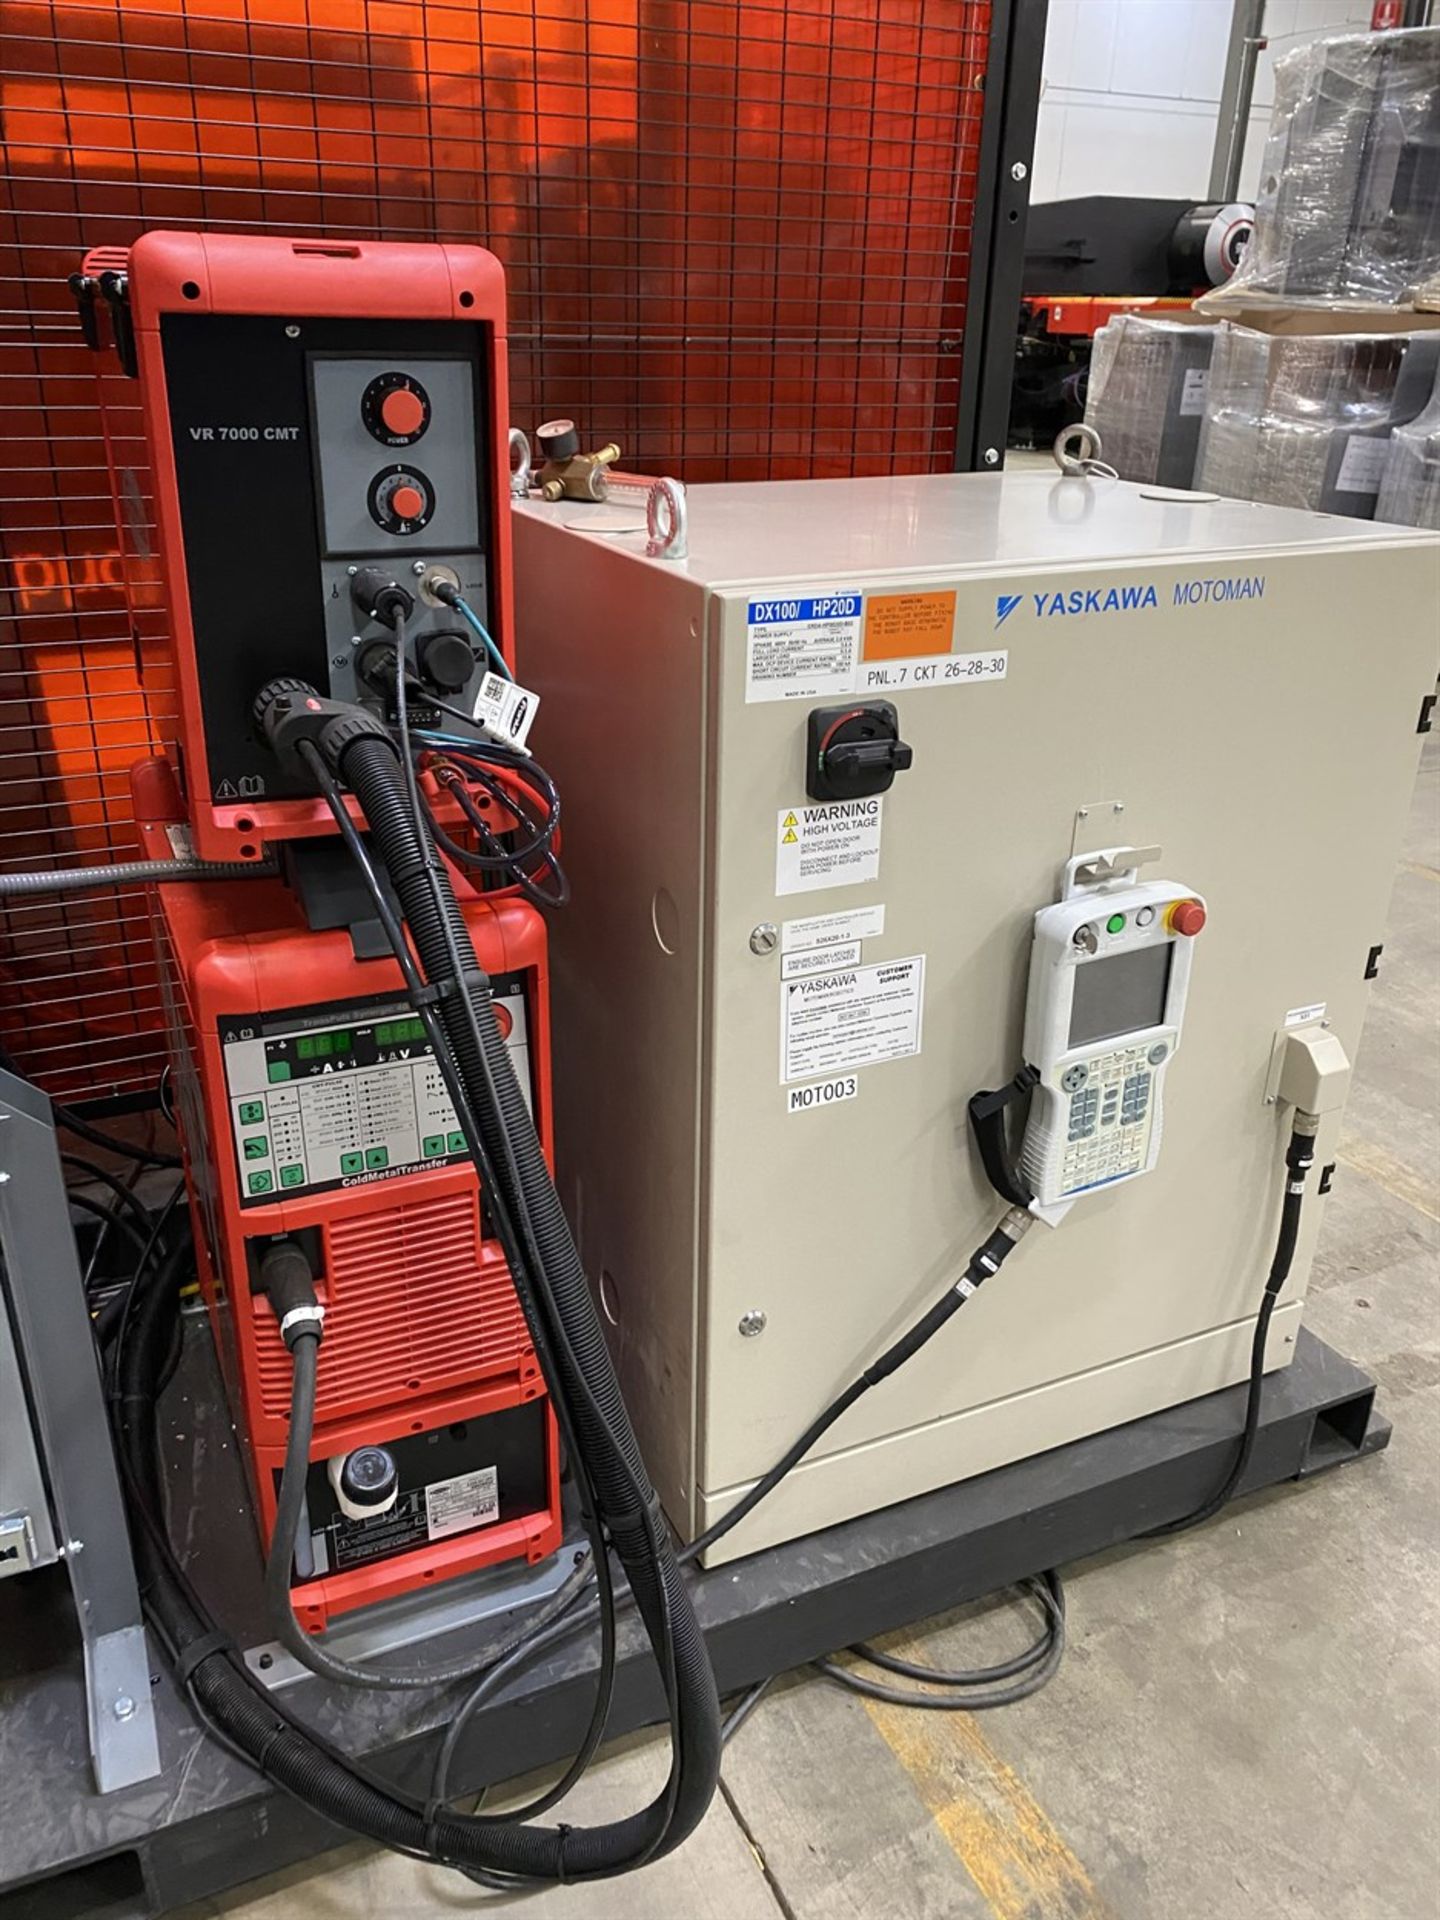 2019 YASKAWA MOTOMAN HP20D Robotic Welding Cell, s/n RH9G00-2703-5, 20 Kg Payload, 6-Axis, 120.6” - Image 6 of 10